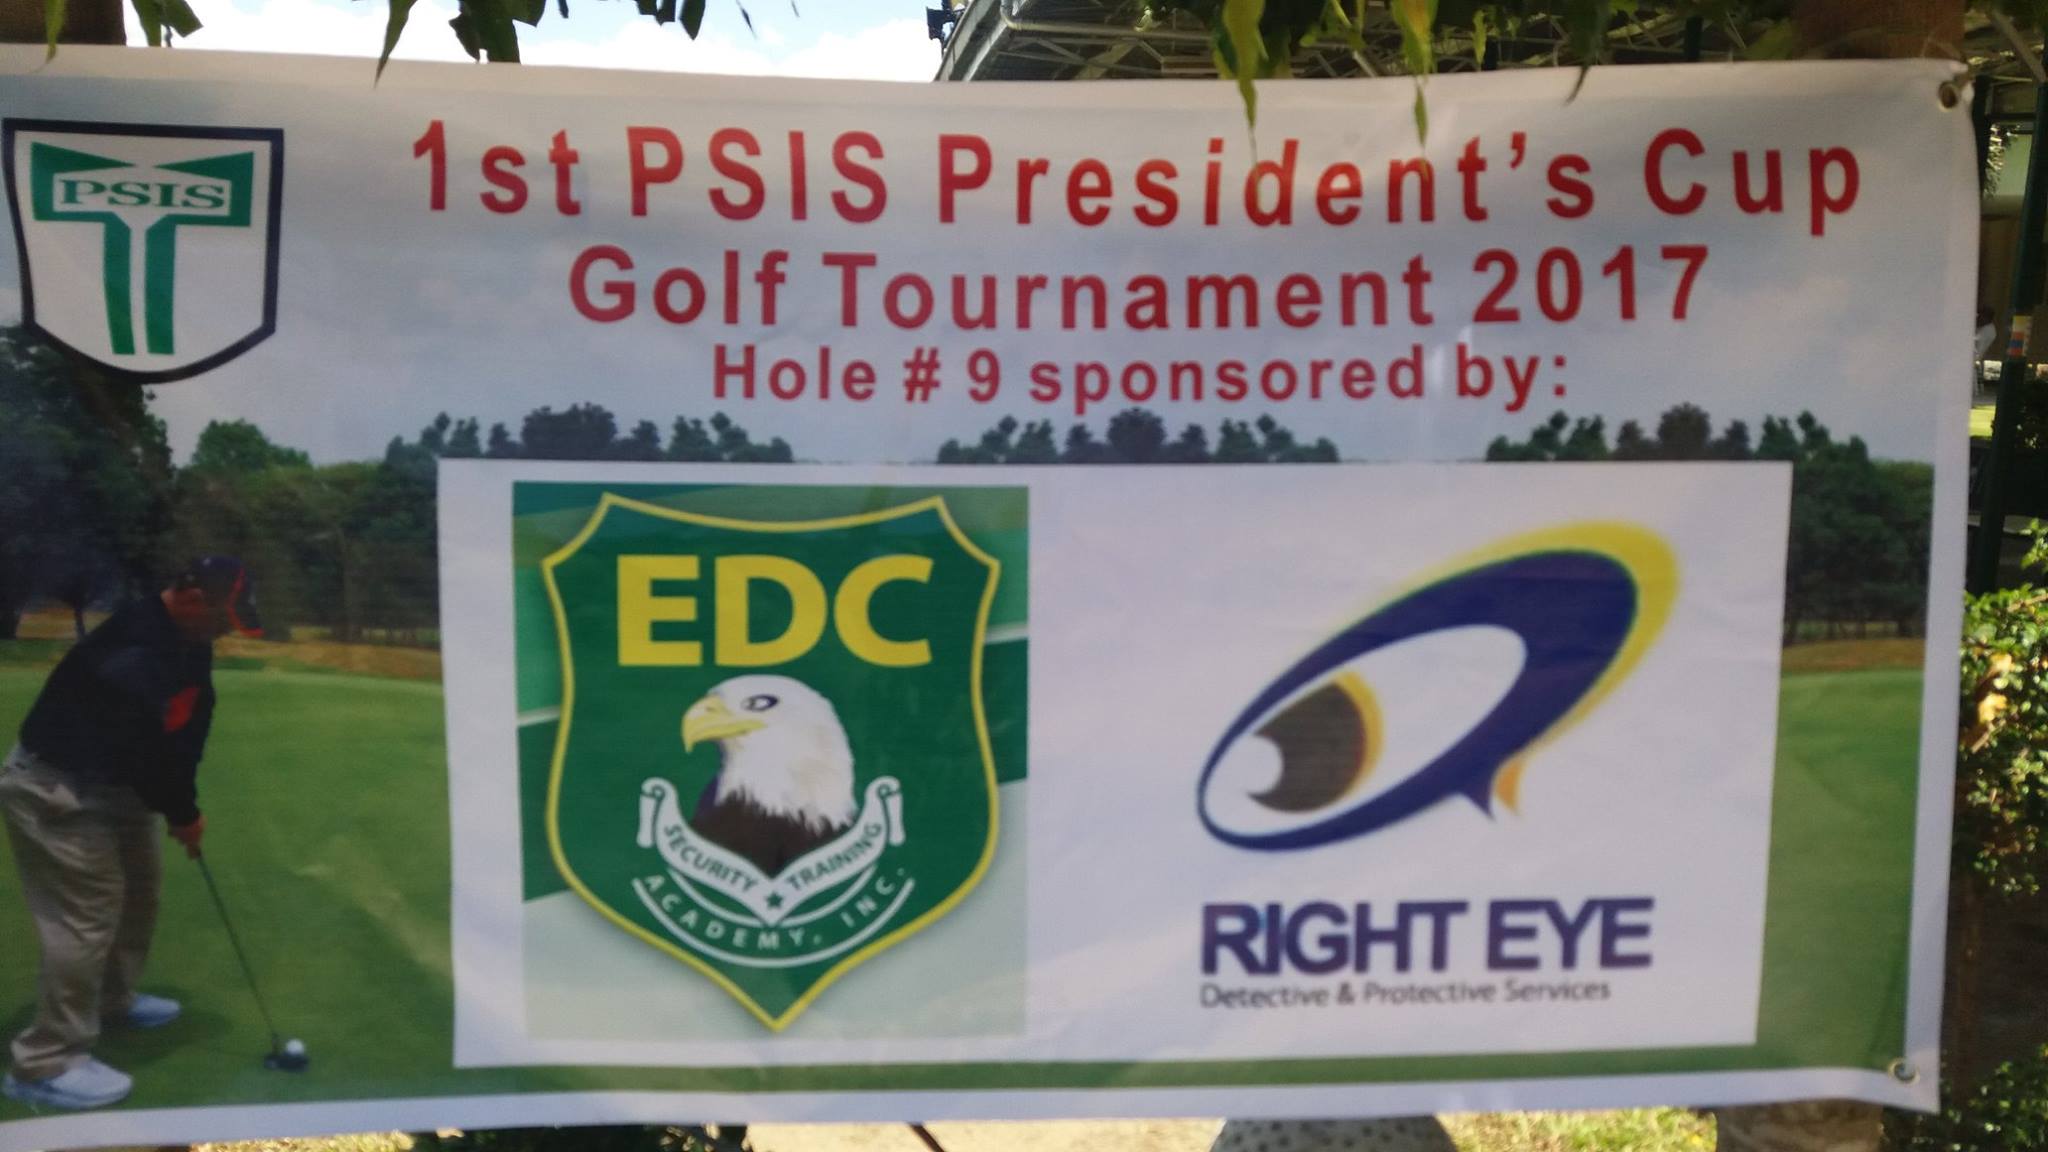 RIGHT EYE and EDC sponsored the PSIS President’s Cup Gold Tournament 2017